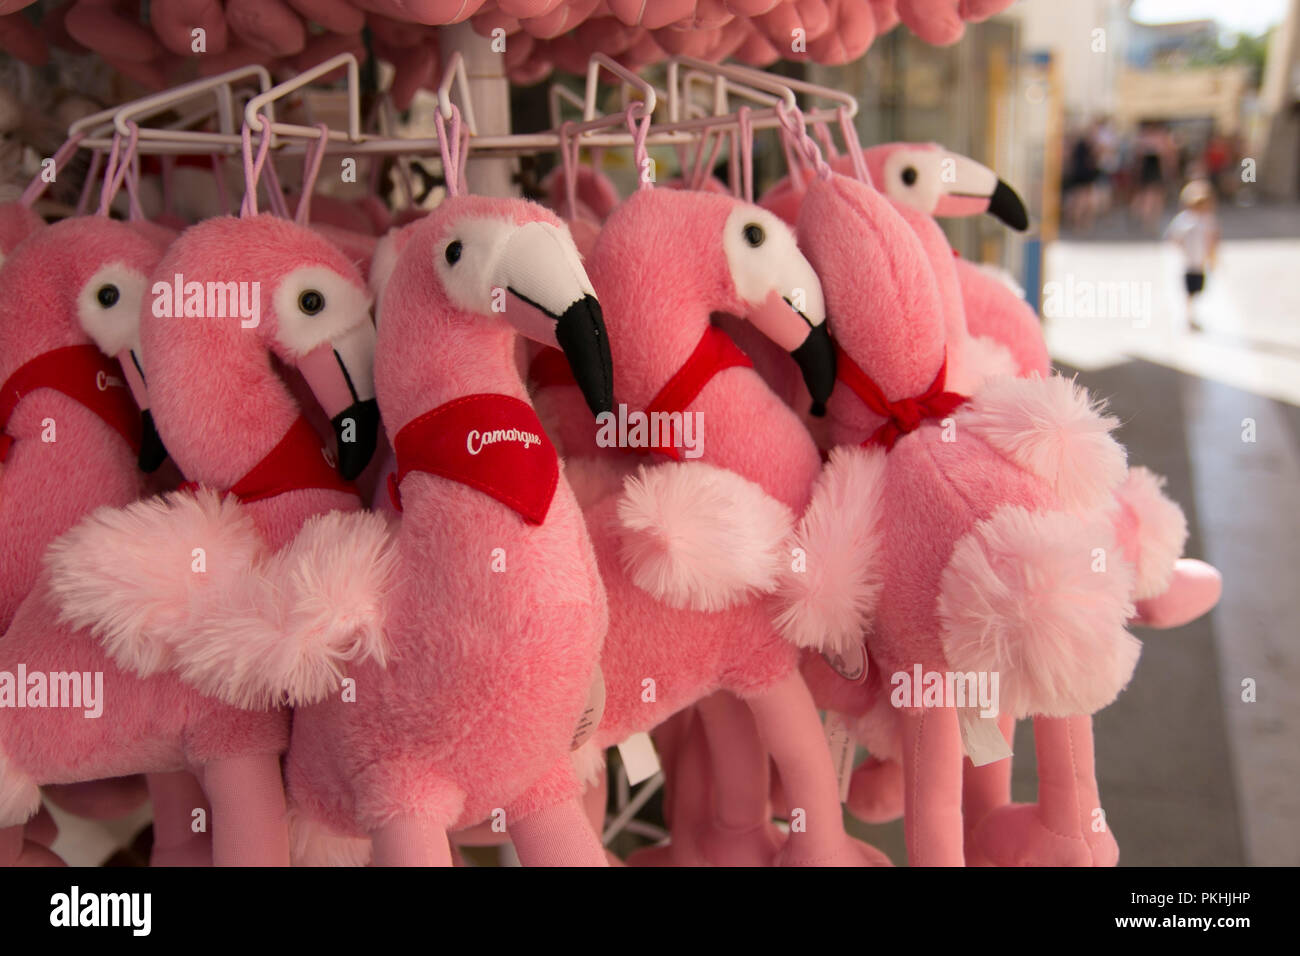 pink Flamingo plush toys with "Camargue" written on red foulards, on sale  in saintes marie de la mer, camargue, france. Close up Stock Photo - Alamy